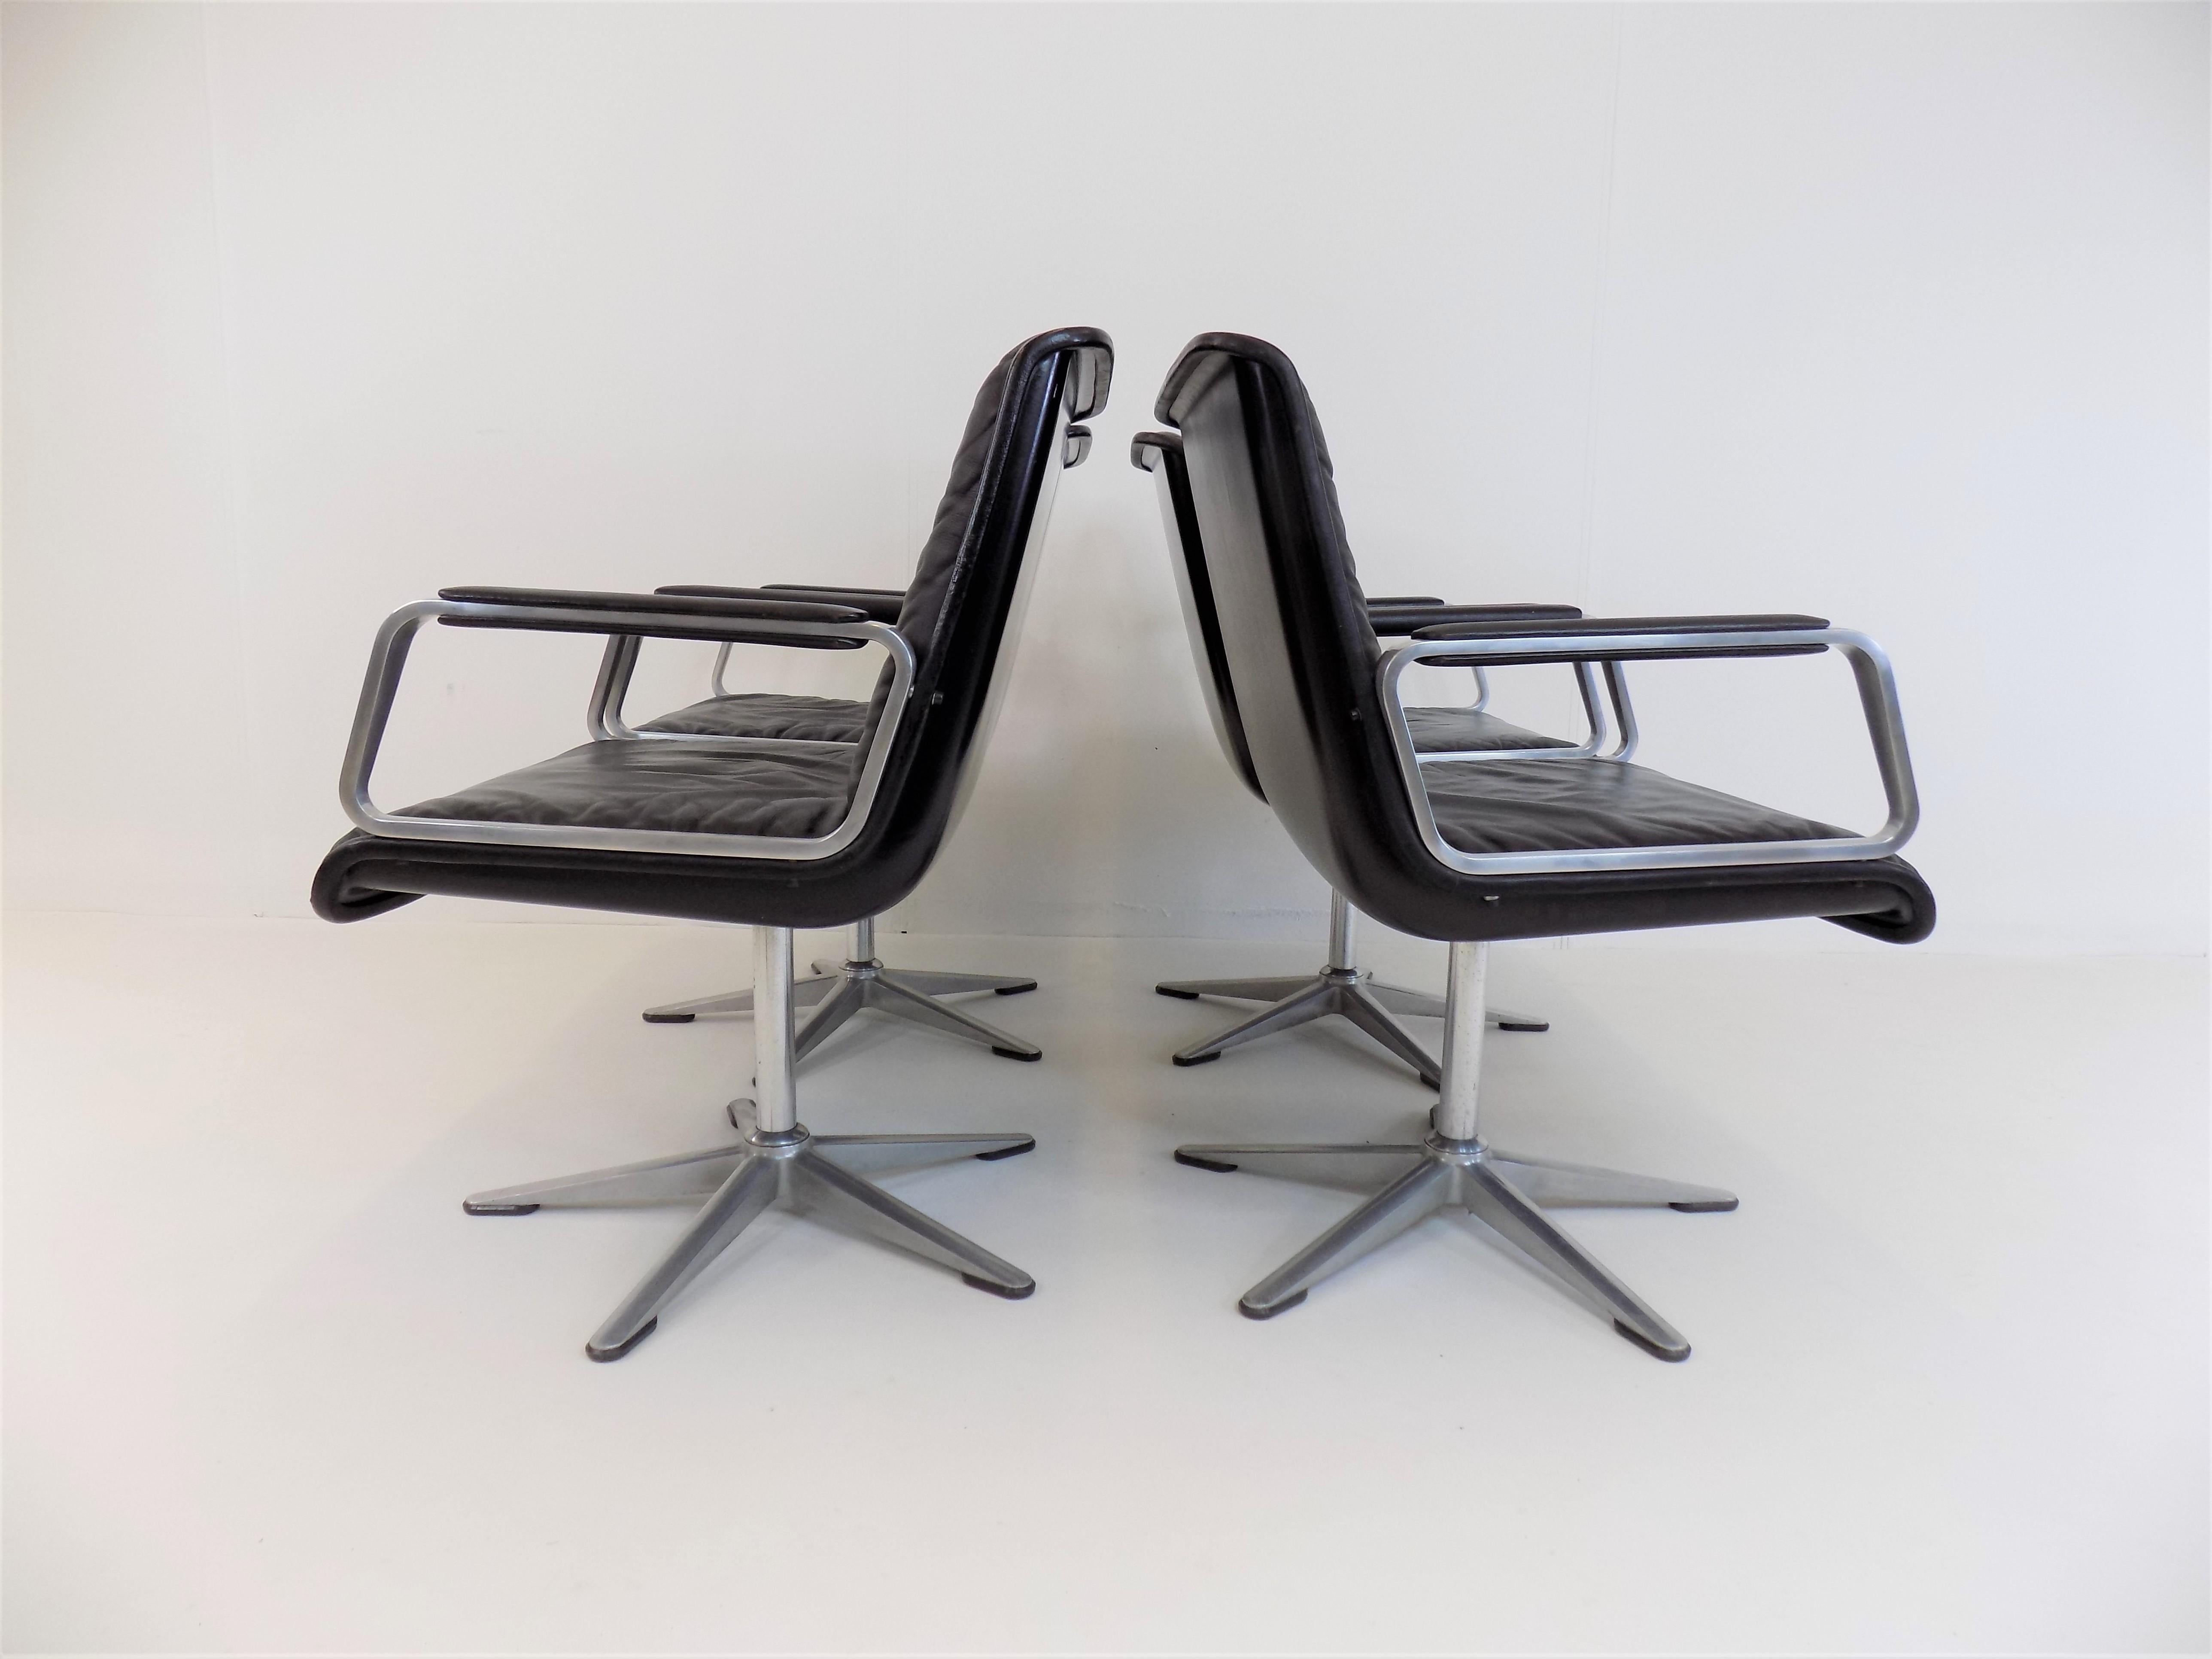 Wilkhahn Delta Set of 4 Dining / Conference Chairs from Delta Group In Good Condition For Sale In Ludwigslust, DE